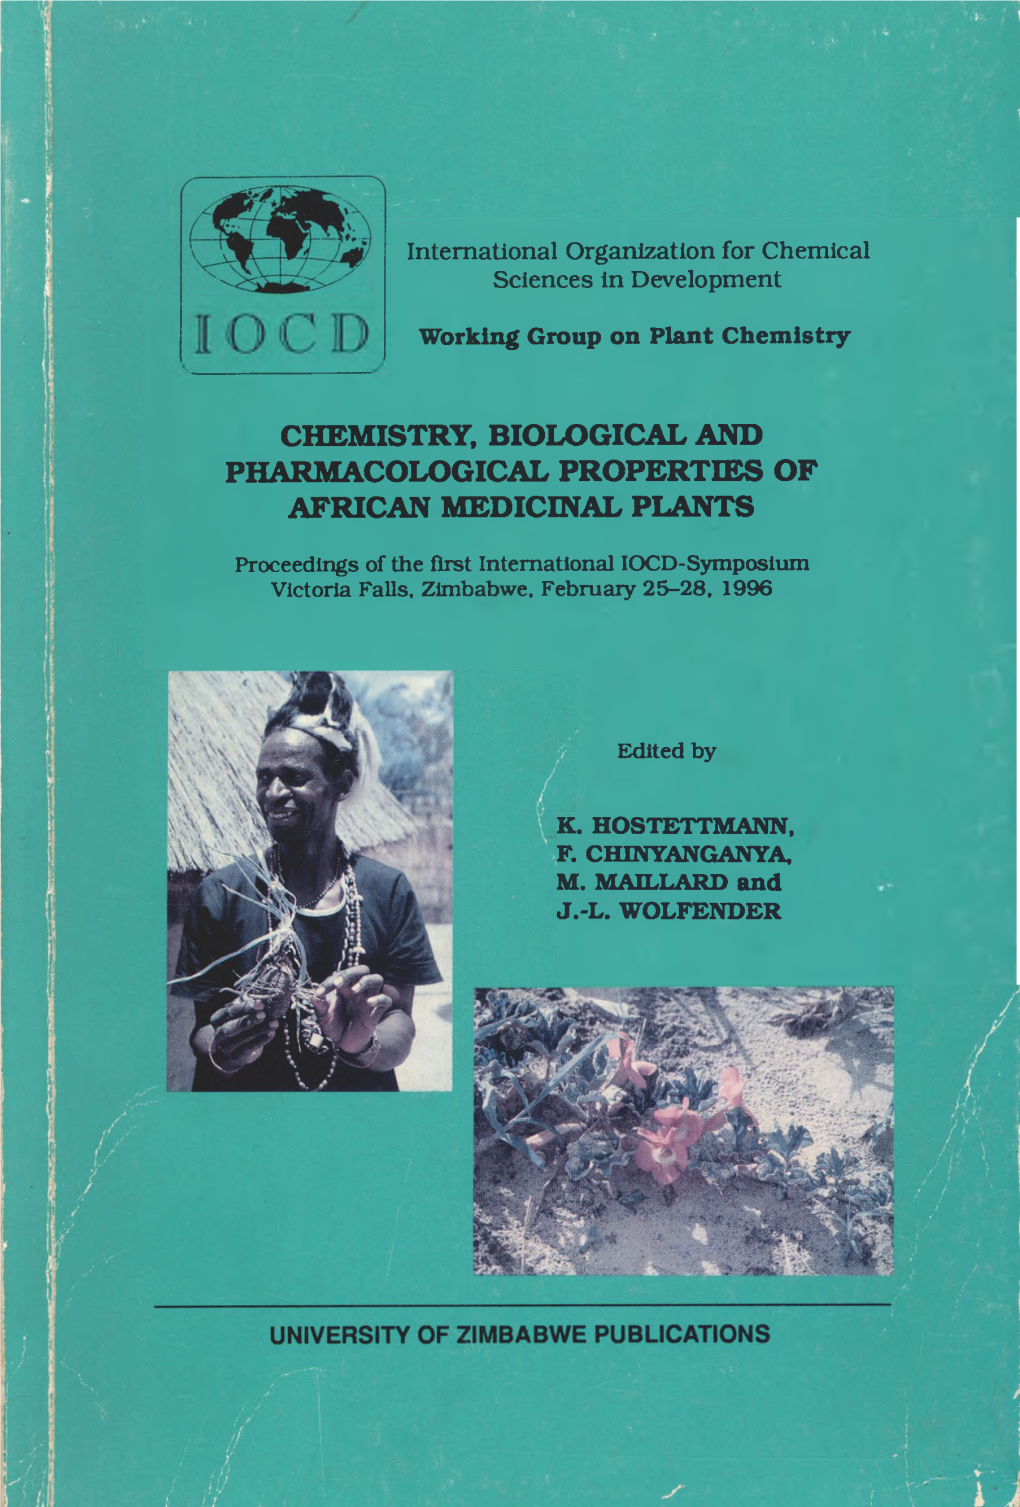 Chemistry, Biological and Pharmacological Properties of African Medicinal Plants